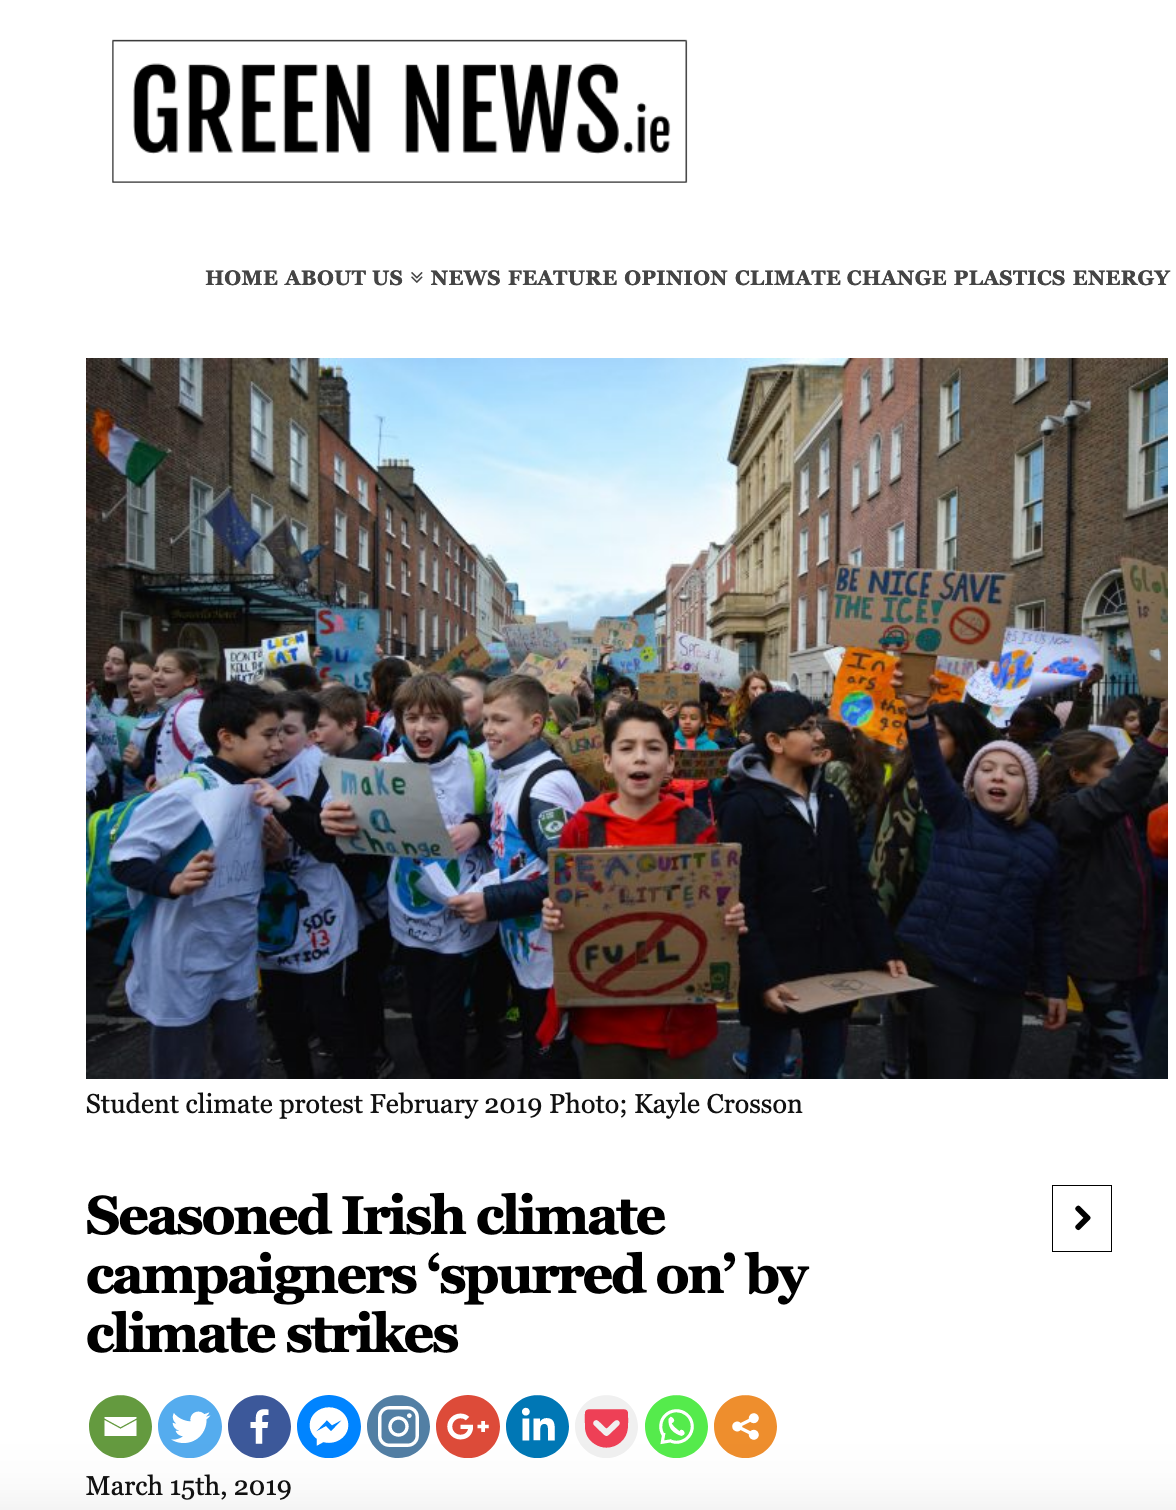 Seasoned Irish climate campaigners ‘spurred on’ by climate strikes